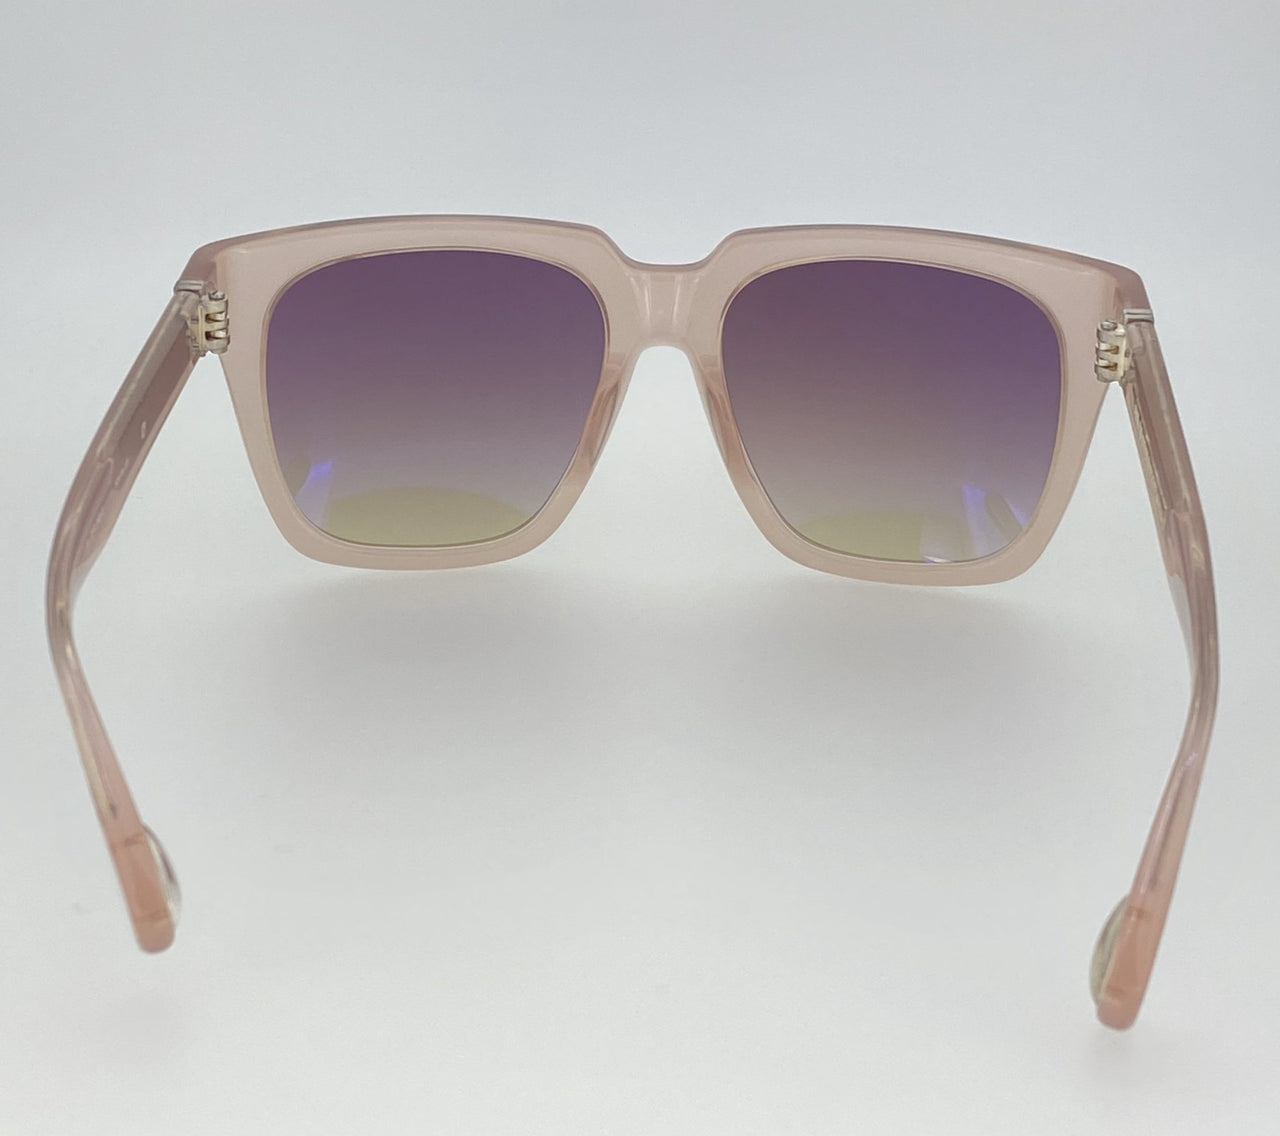 Ann Demeulemeester Sunglasses Oversized Blush Pink with Brown Lenses 925 Silver AD21C5SUN - Watches & Crystals